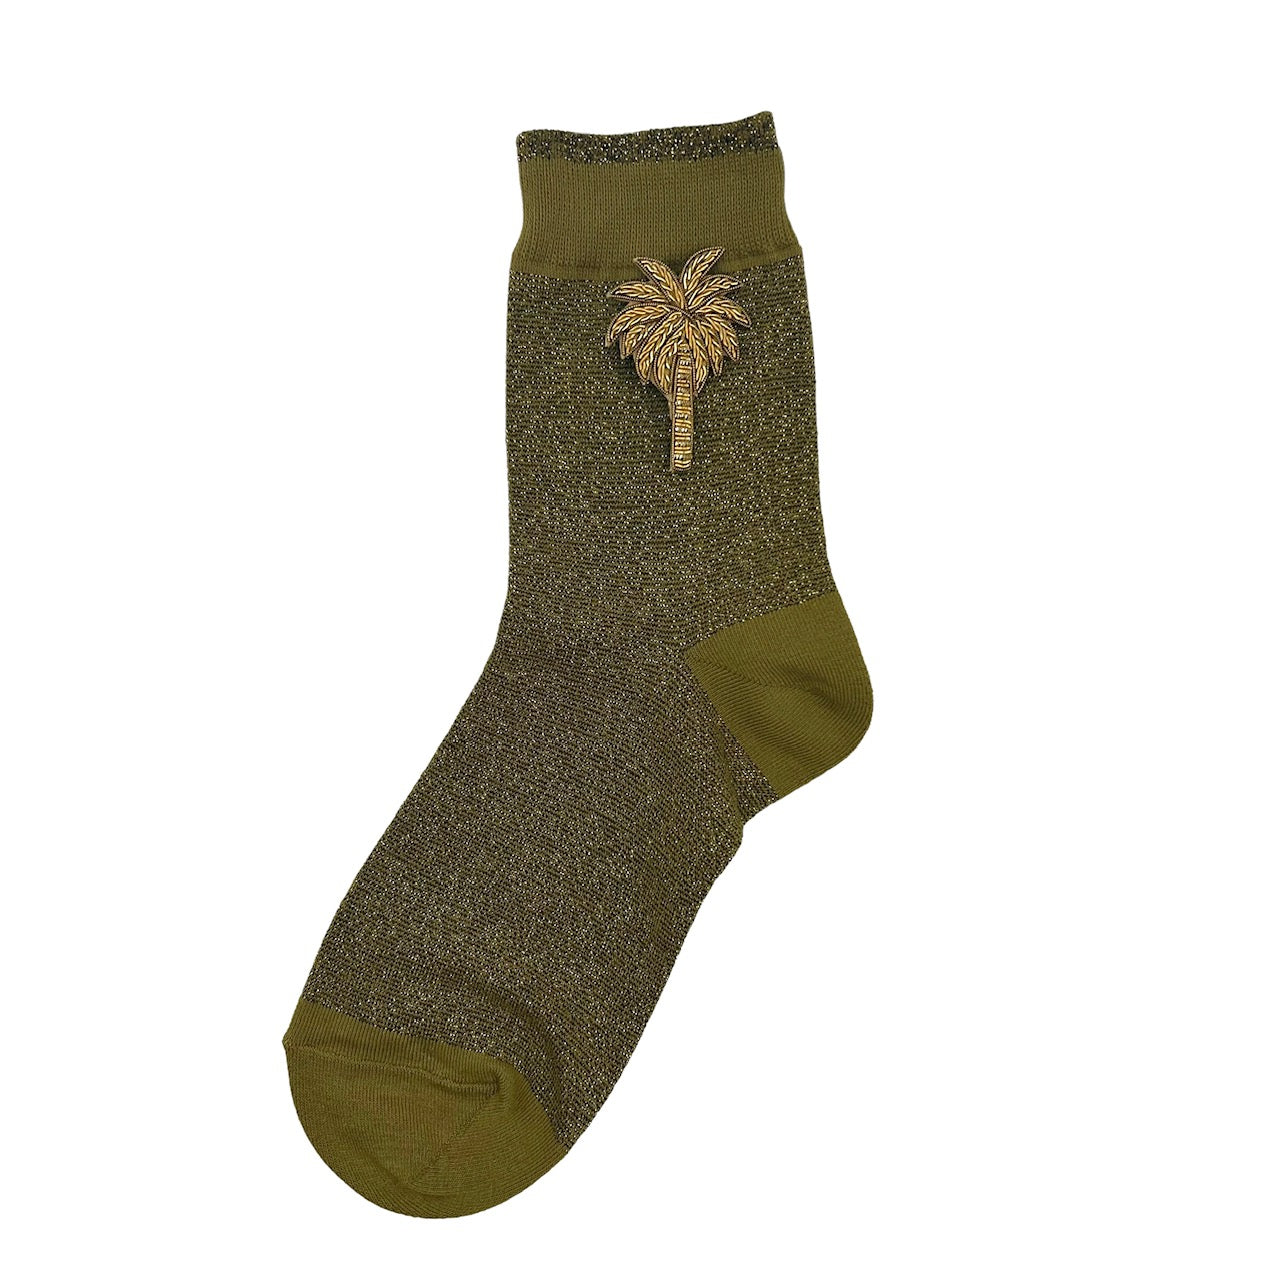 Tokyo socks in olive with a small palm tree brooch